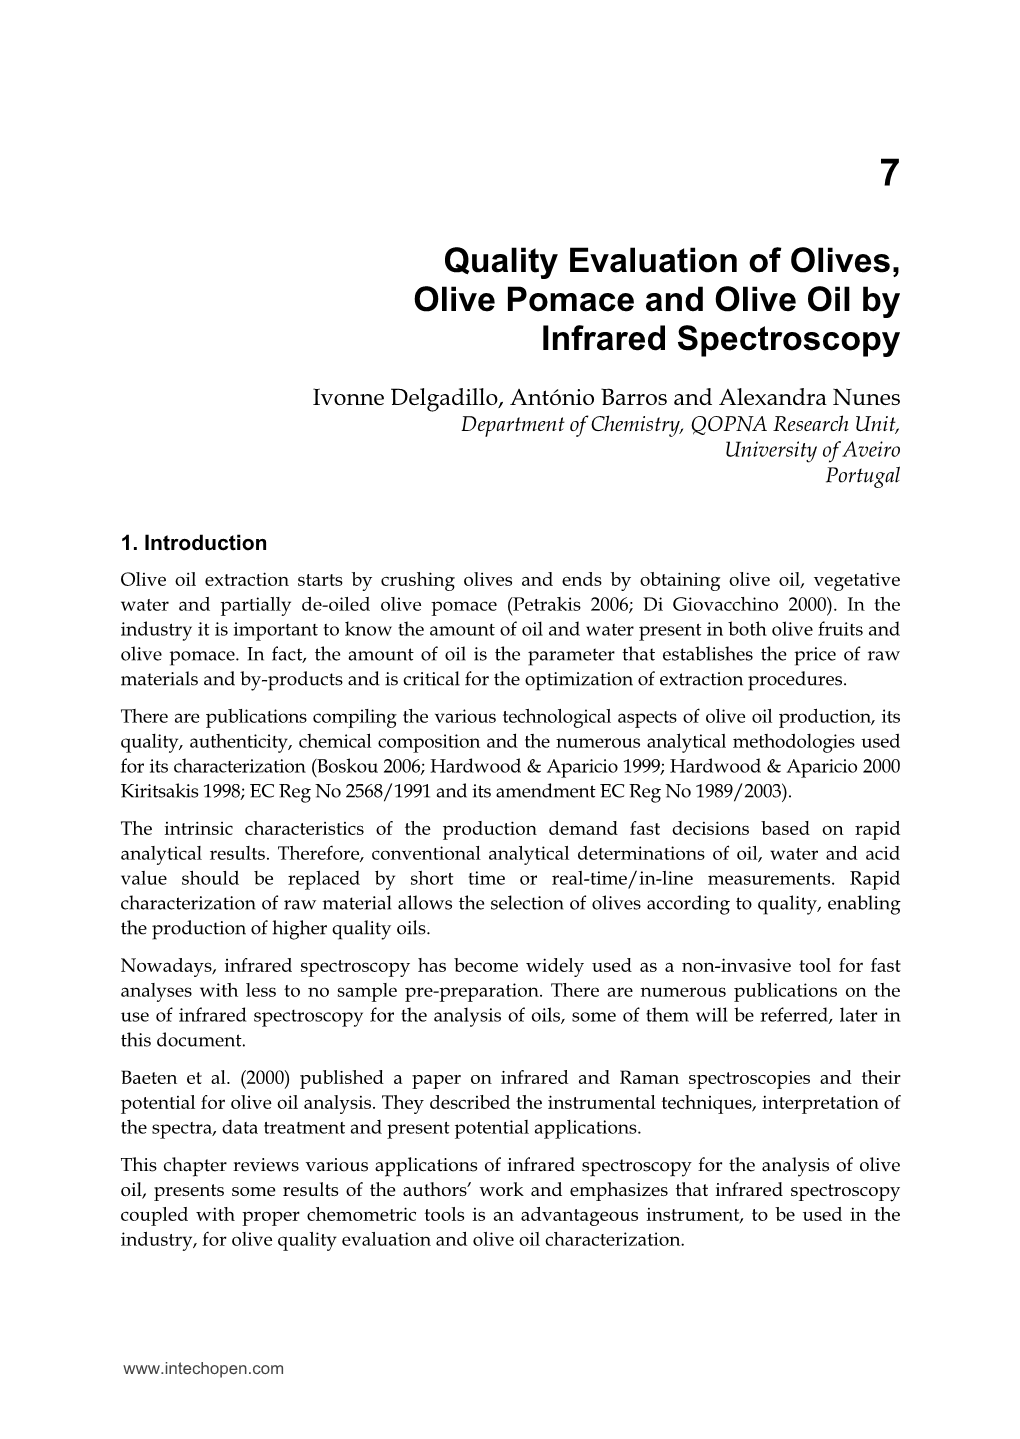 Quality Evaluation of Olives, Olive Pomace and Olive Oil by Infrared Spectroscopy